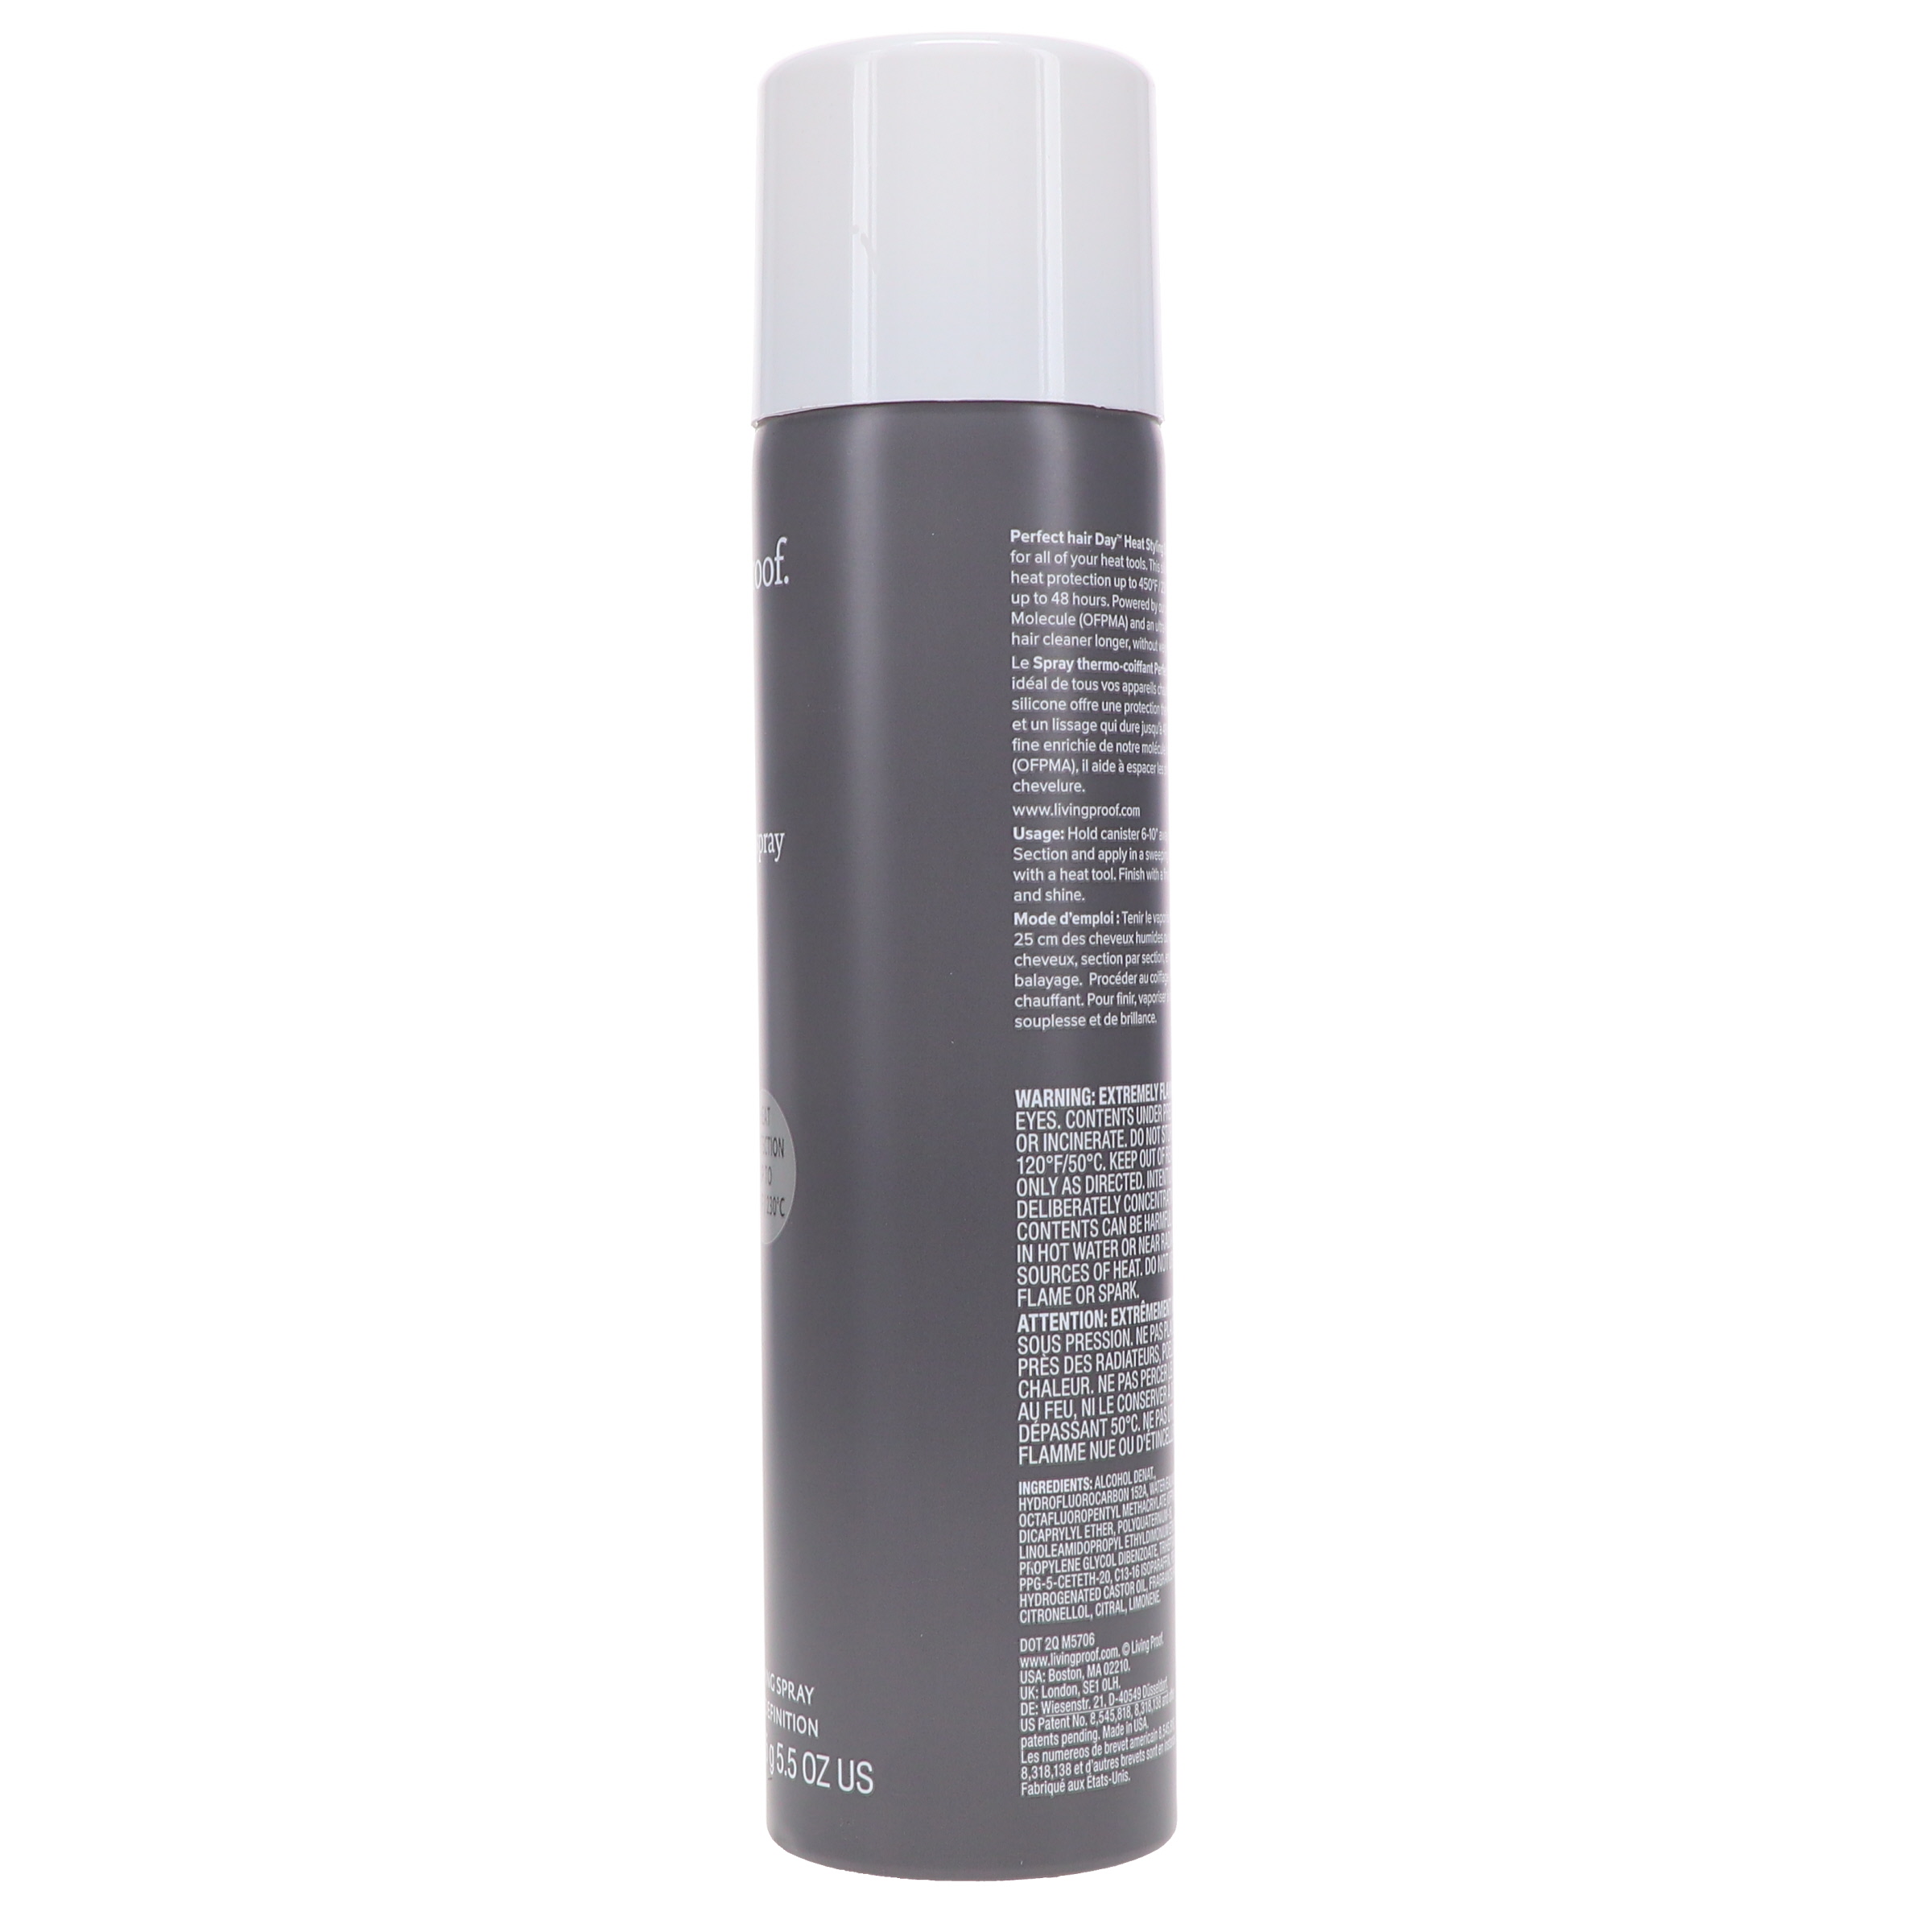 Living Proof Perfect Hair Day Heat Styling Spray 5.5 oz - image 3 of 7